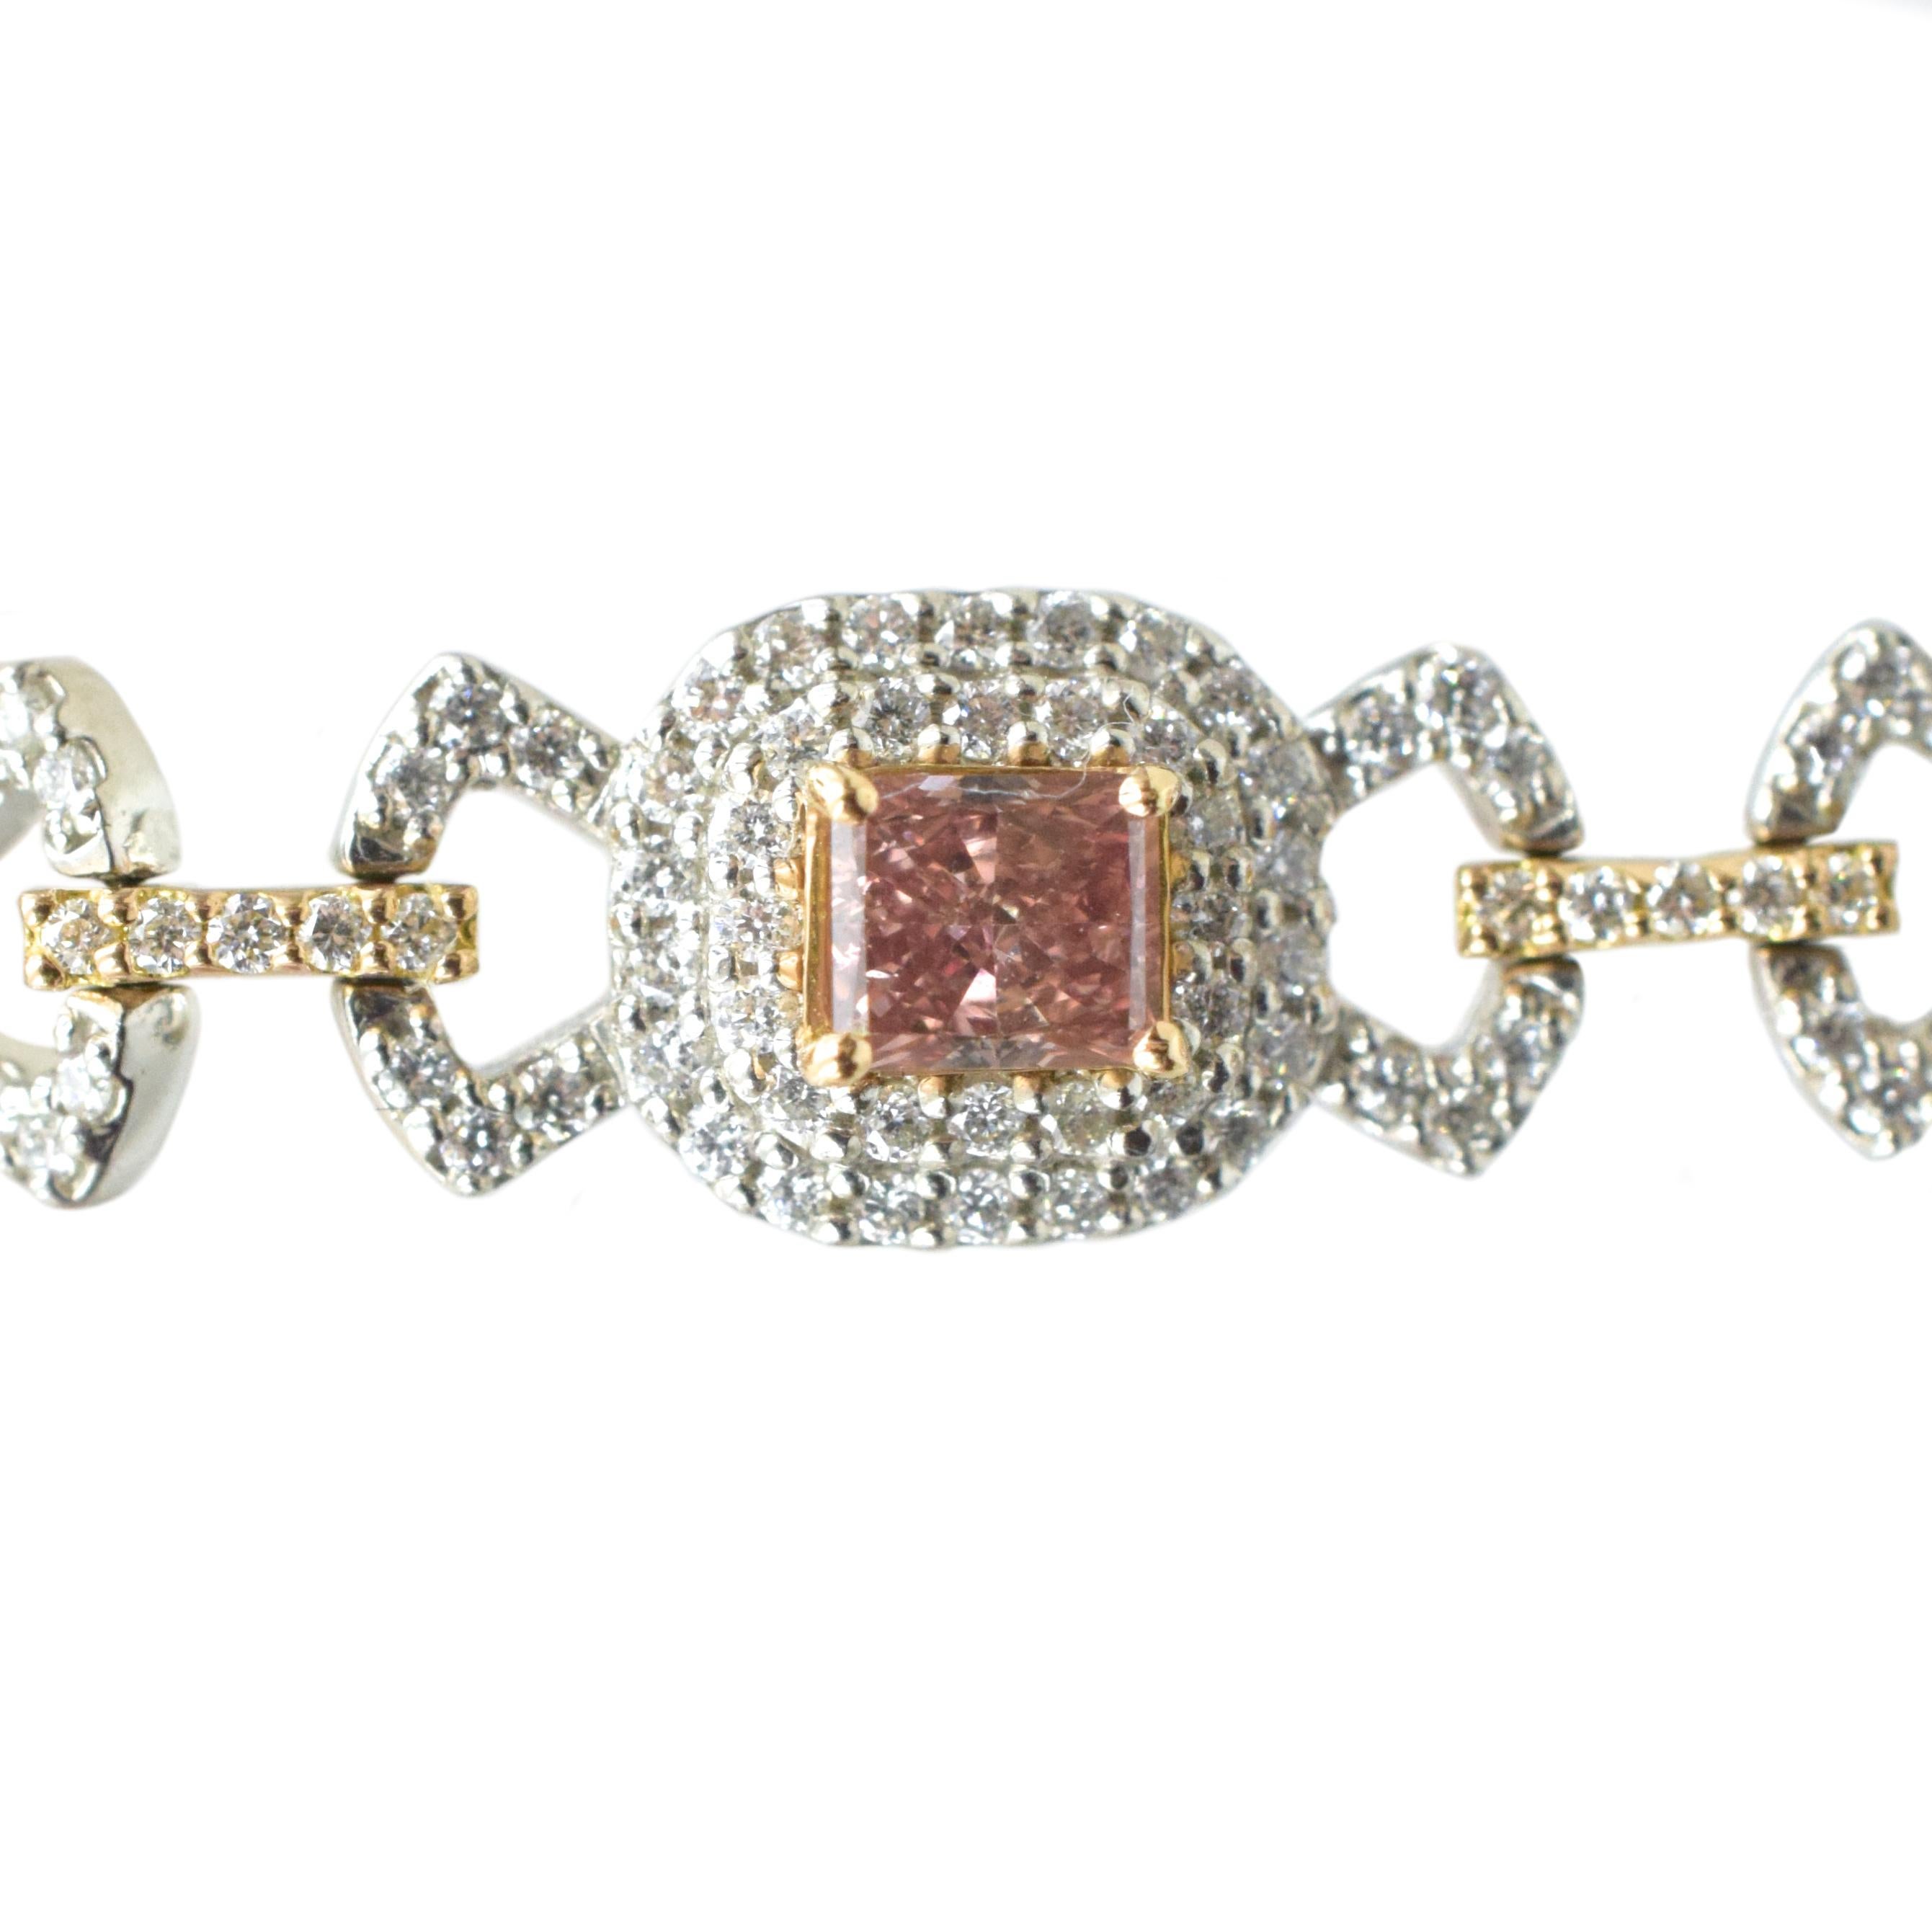 Fancy Pink  and White Diamond Bracelet.
Set with eight pink color cut-cornered rectangular, square, and cushion modified brilliant-cut fancy intense pink, fancy intense orangy pink, fancy orangy pink diamonds weighing 2.57ct in total.
 Accented by